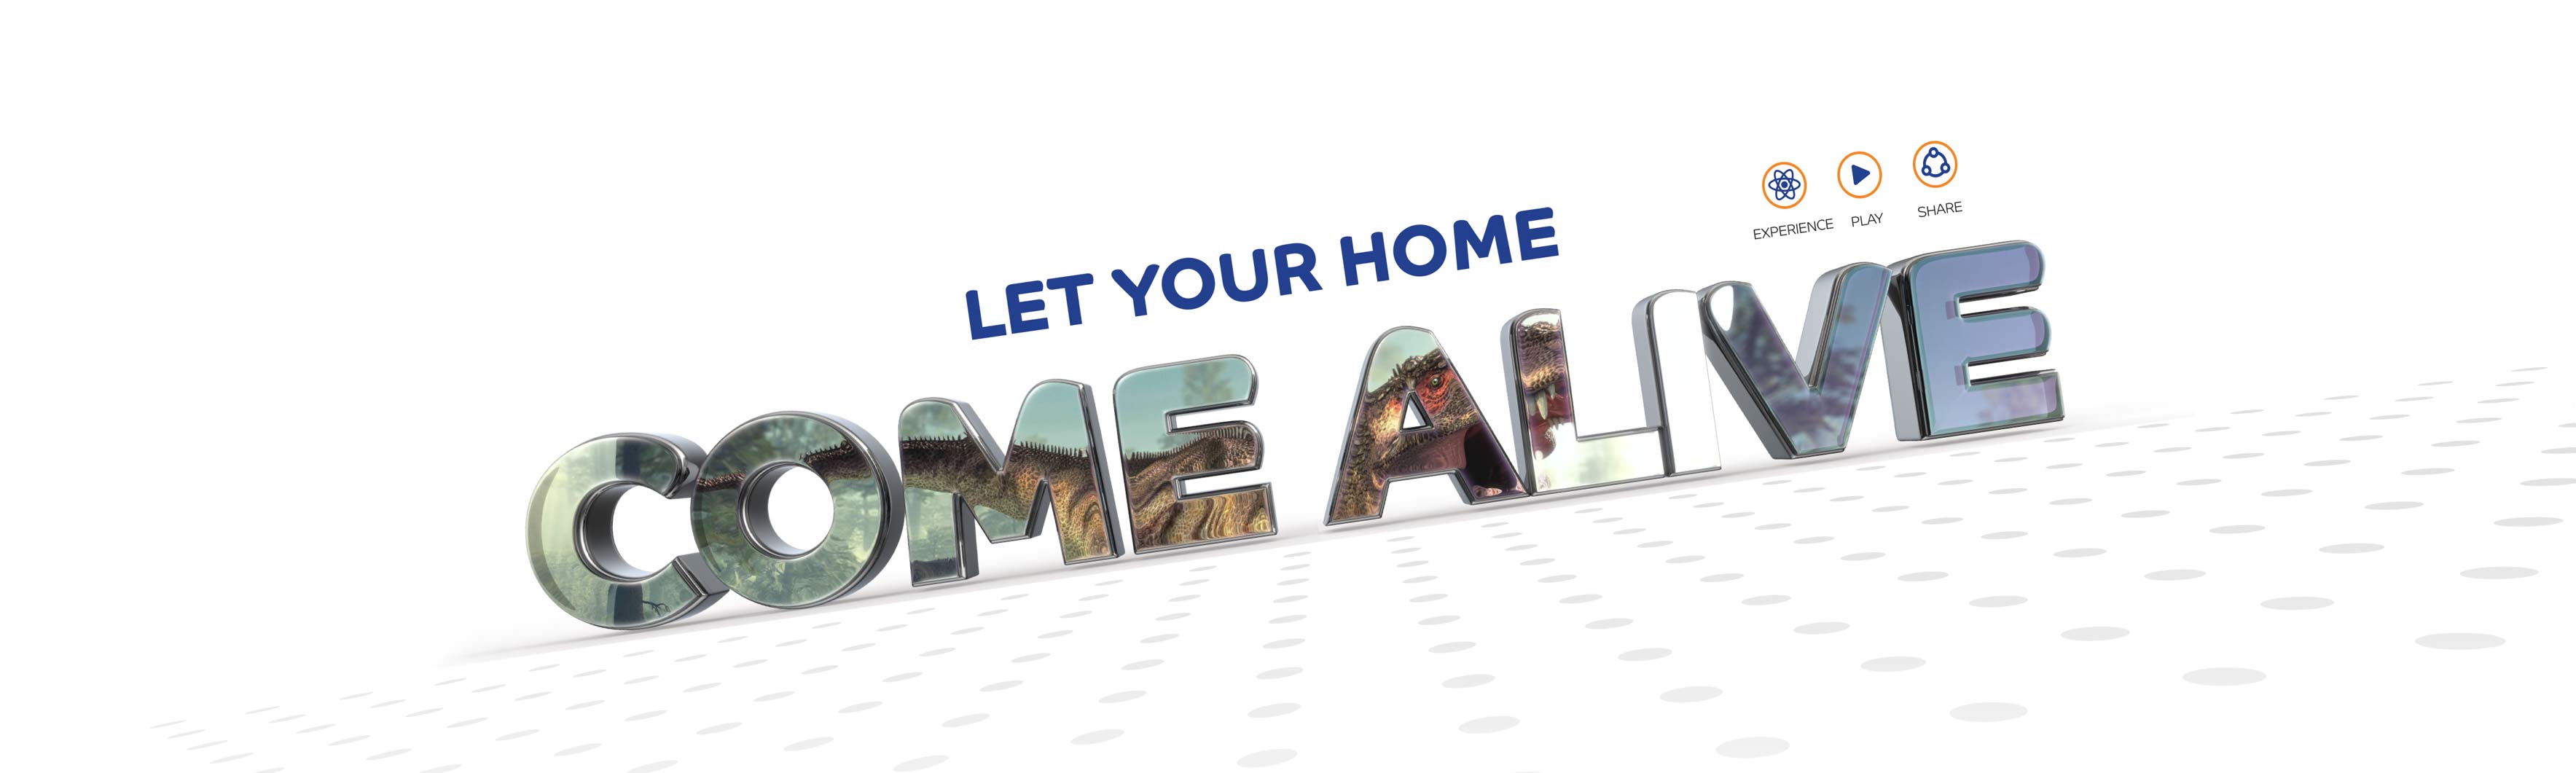 ZOL_COME_ALIVE_HOME_PAGE_BANNER_01